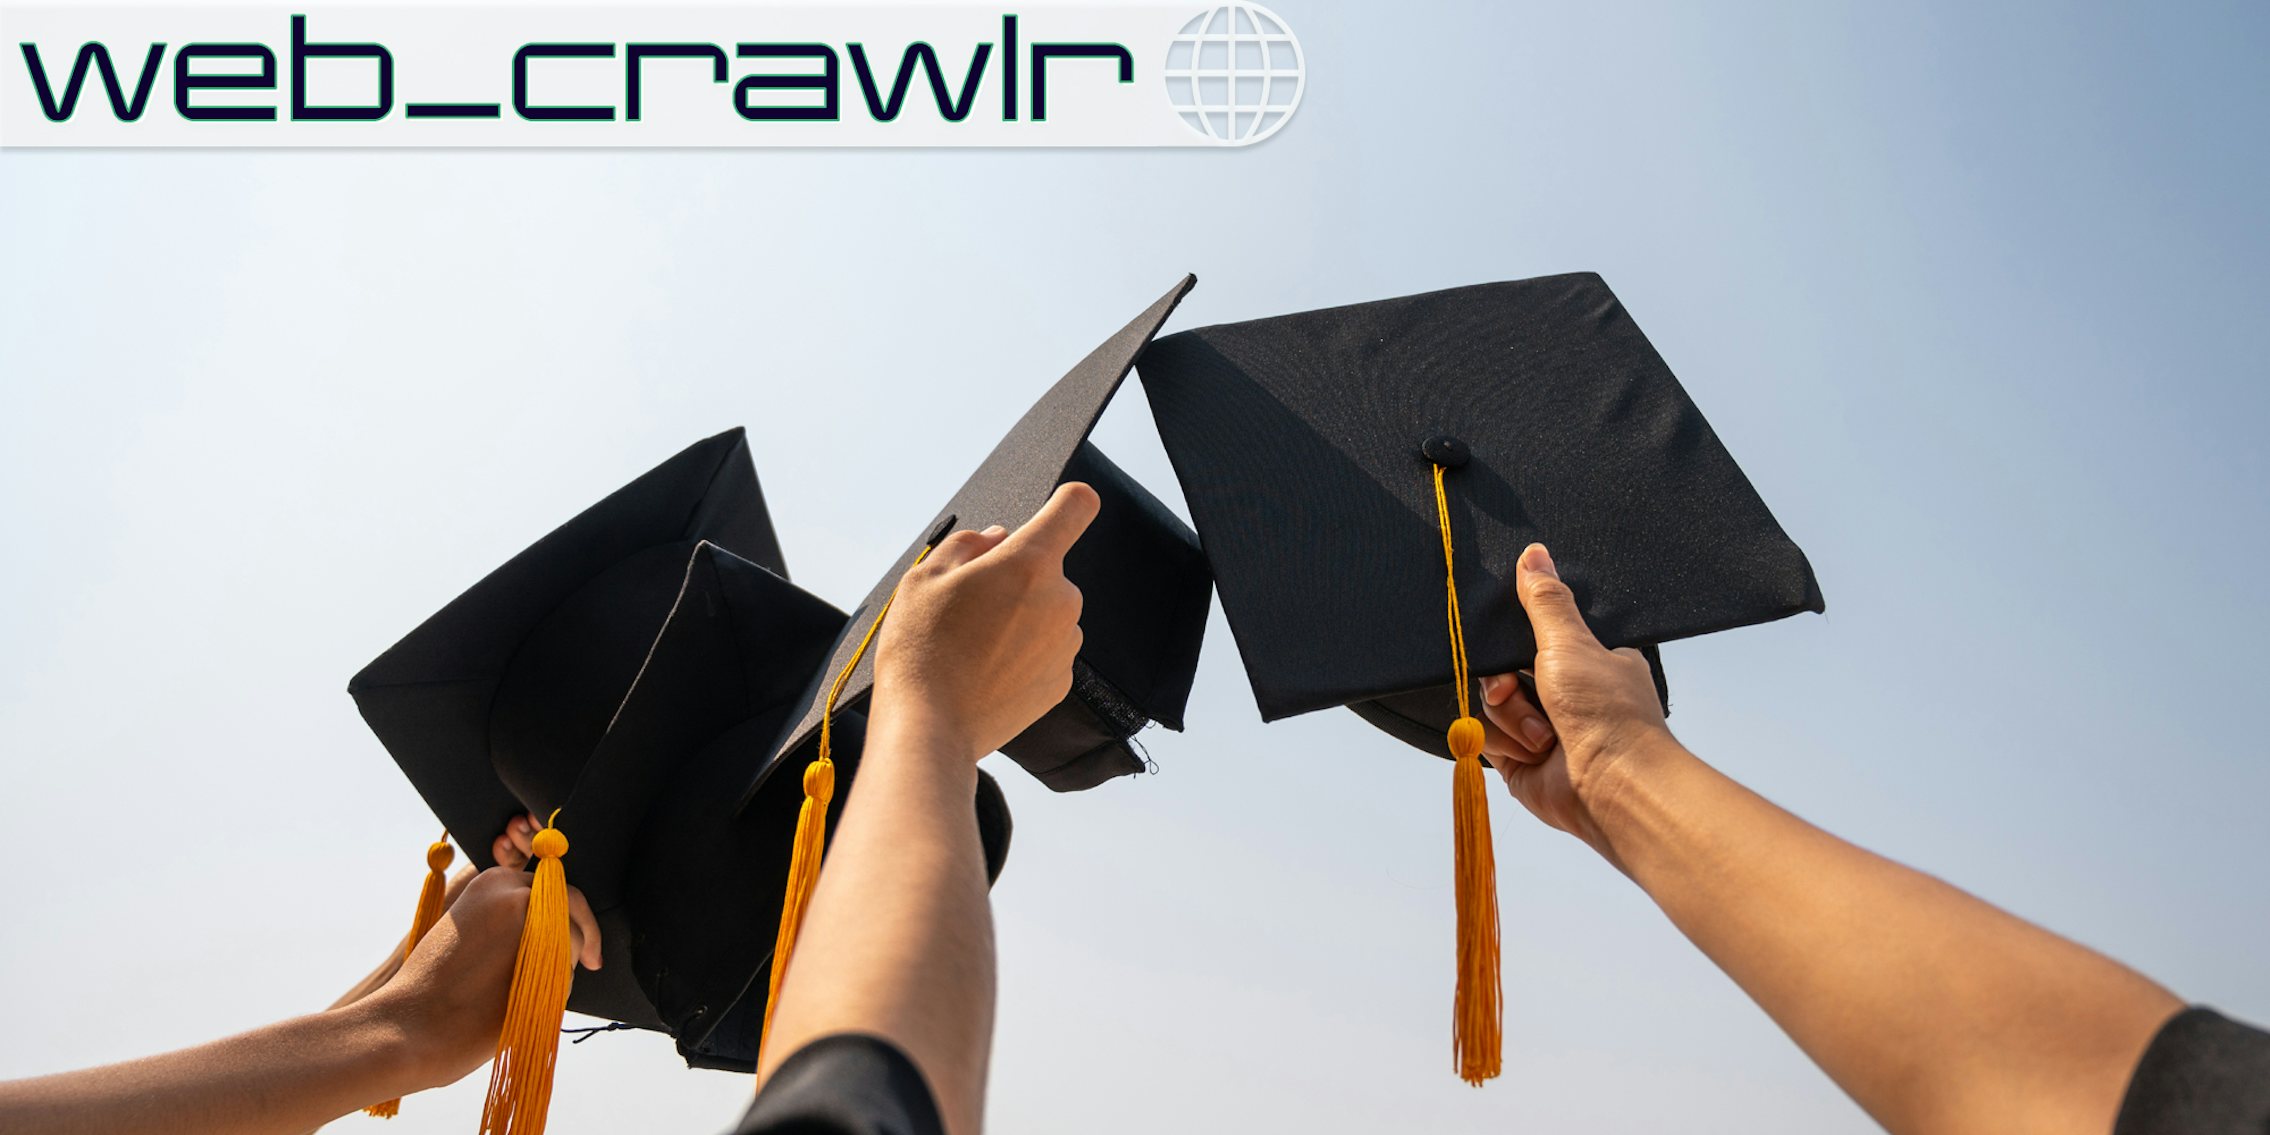 Graduation caps being held in the air. The Daily Dot newsletter web_crawlr logo is in the top left corner.